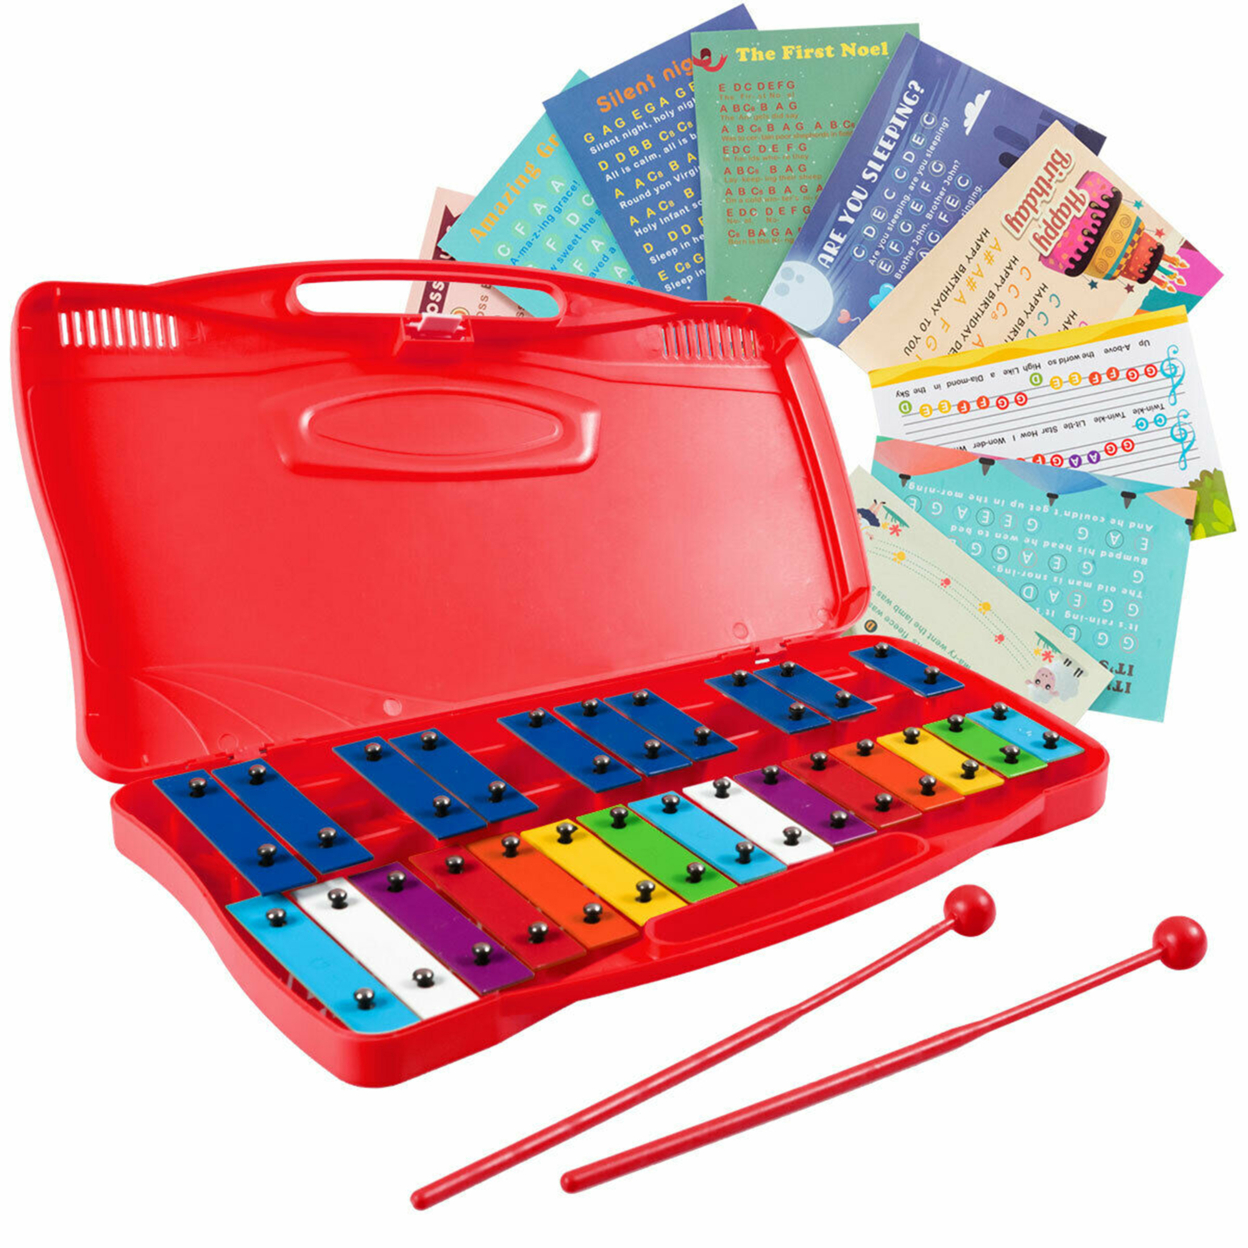 25 Notes Kids Glockenspiel Chromatic Metal Xylophone W/ Red Case And 2 Mallets